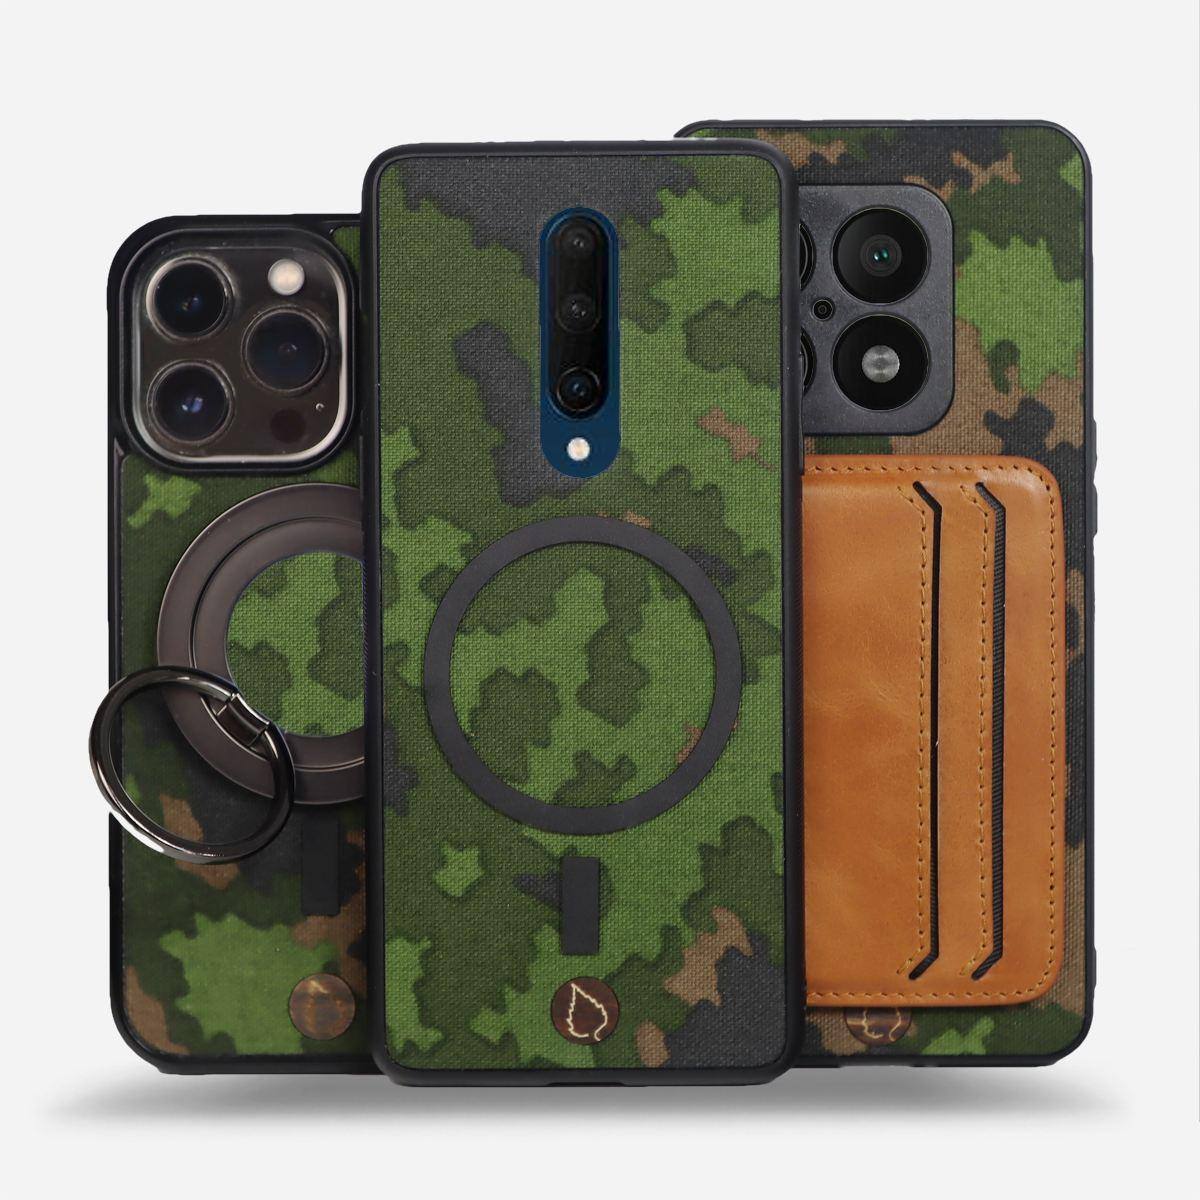  Phone Cases, crafted from authentic military fabrics like Finnish Army M05, Flecktarn and Armed Forcers of Ukraine MM14 Digital Camo